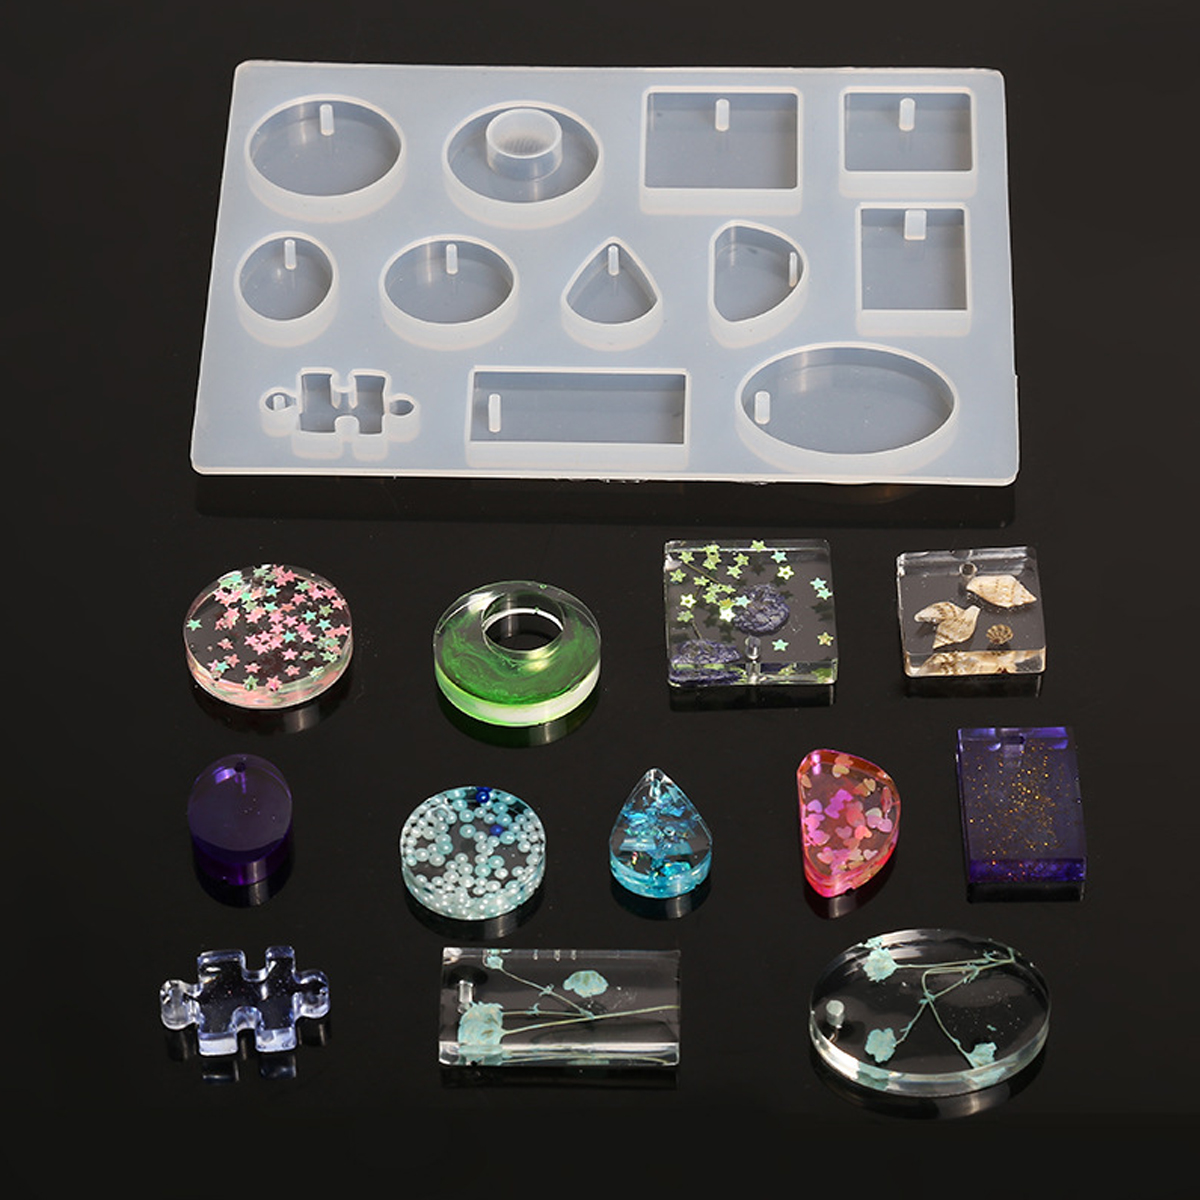 285Pcs-Resin-Casting-Molds-Kit-Silicone-Making-Jewelry-DIY-Pendant-Craft-Mould-Tools-Kit-1808480-6